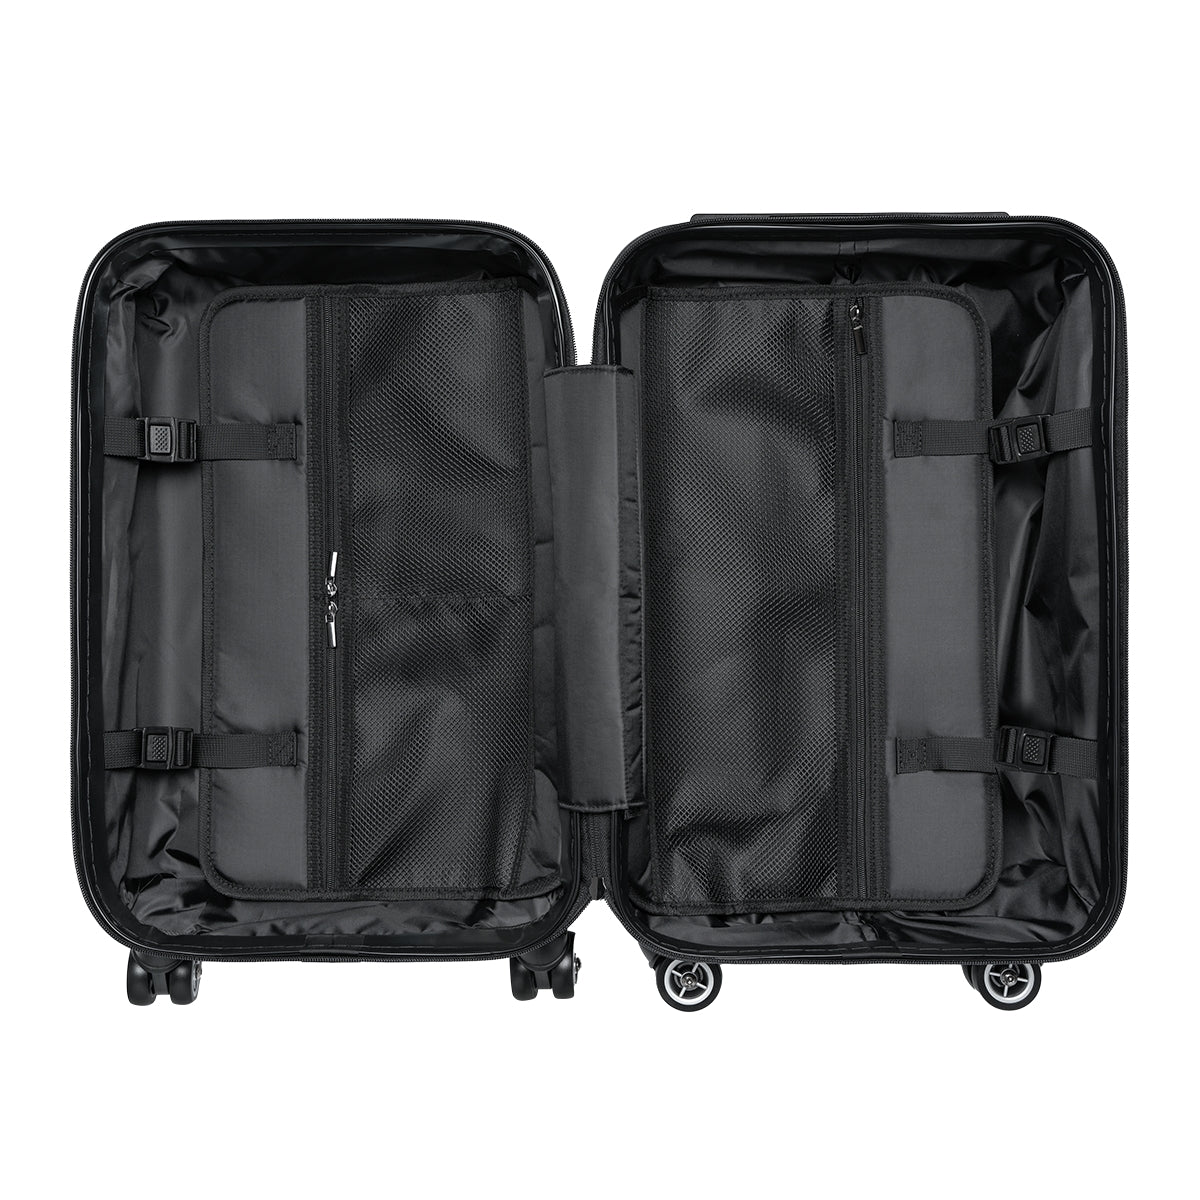 Getrott Duran Duran Rio Black Cabin Suitcase Extended Storage Adjustable Telescopic Handle Double wheeled Polycarbonate Hard-shell Built-in Lock-Bags-Geotrott